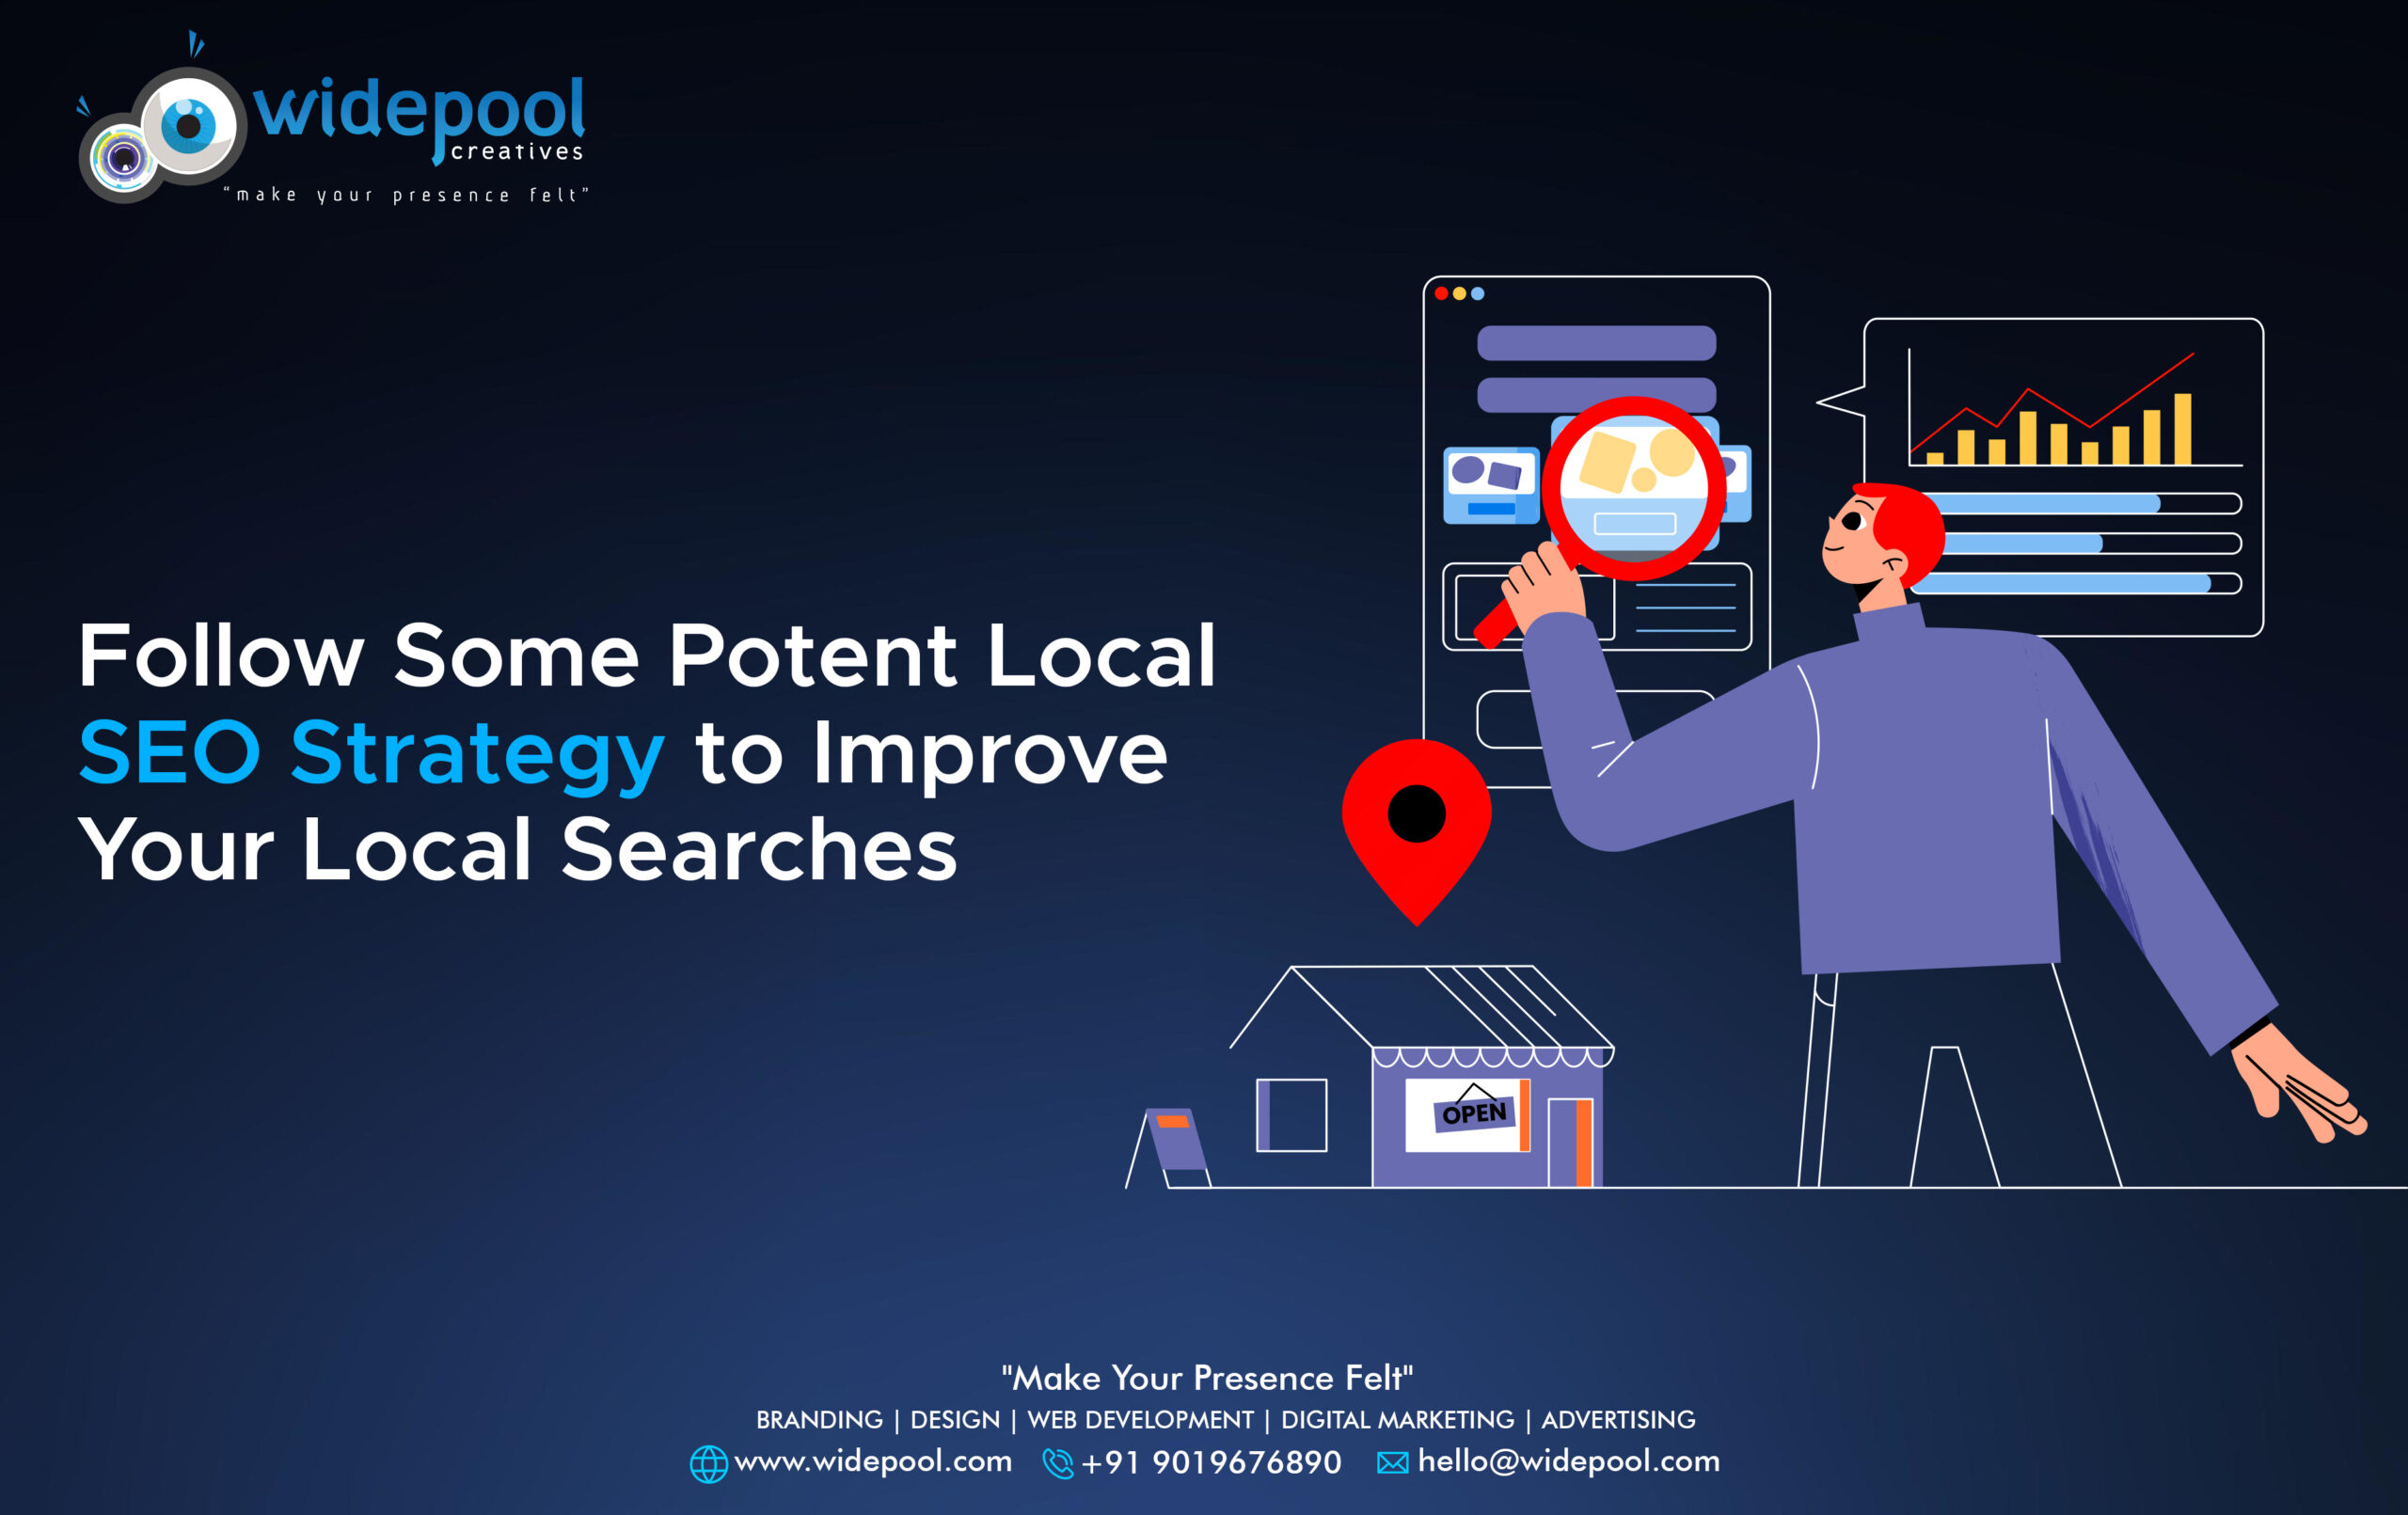 Follow Some Potent Local SEO Strategy to Improve Your Local Searches